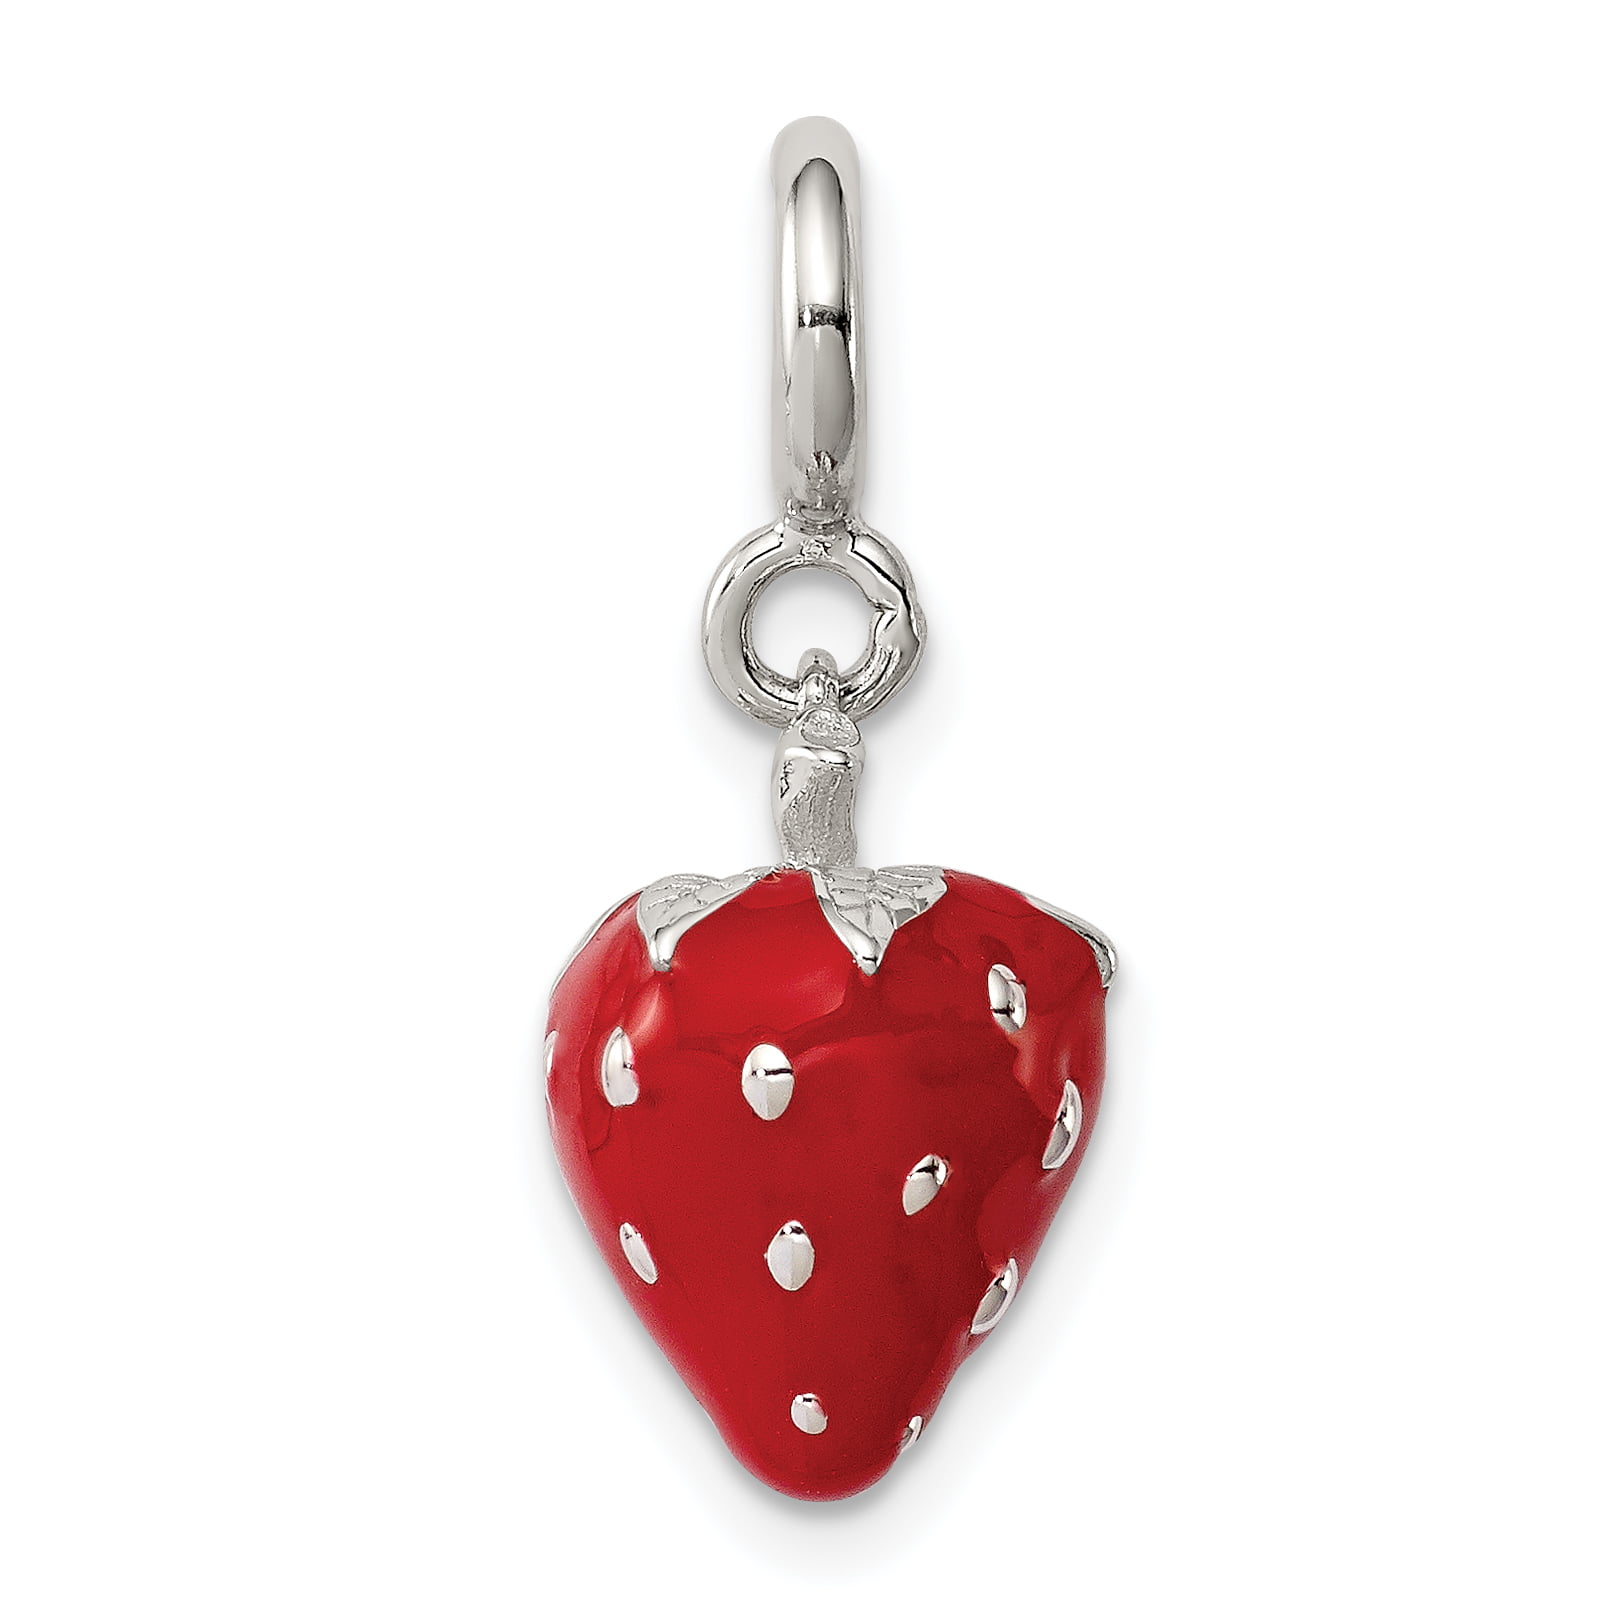 AFFY Jewelry Red Enamel Strawberry Charm Pendant Necklace 925 Sterling Silver 